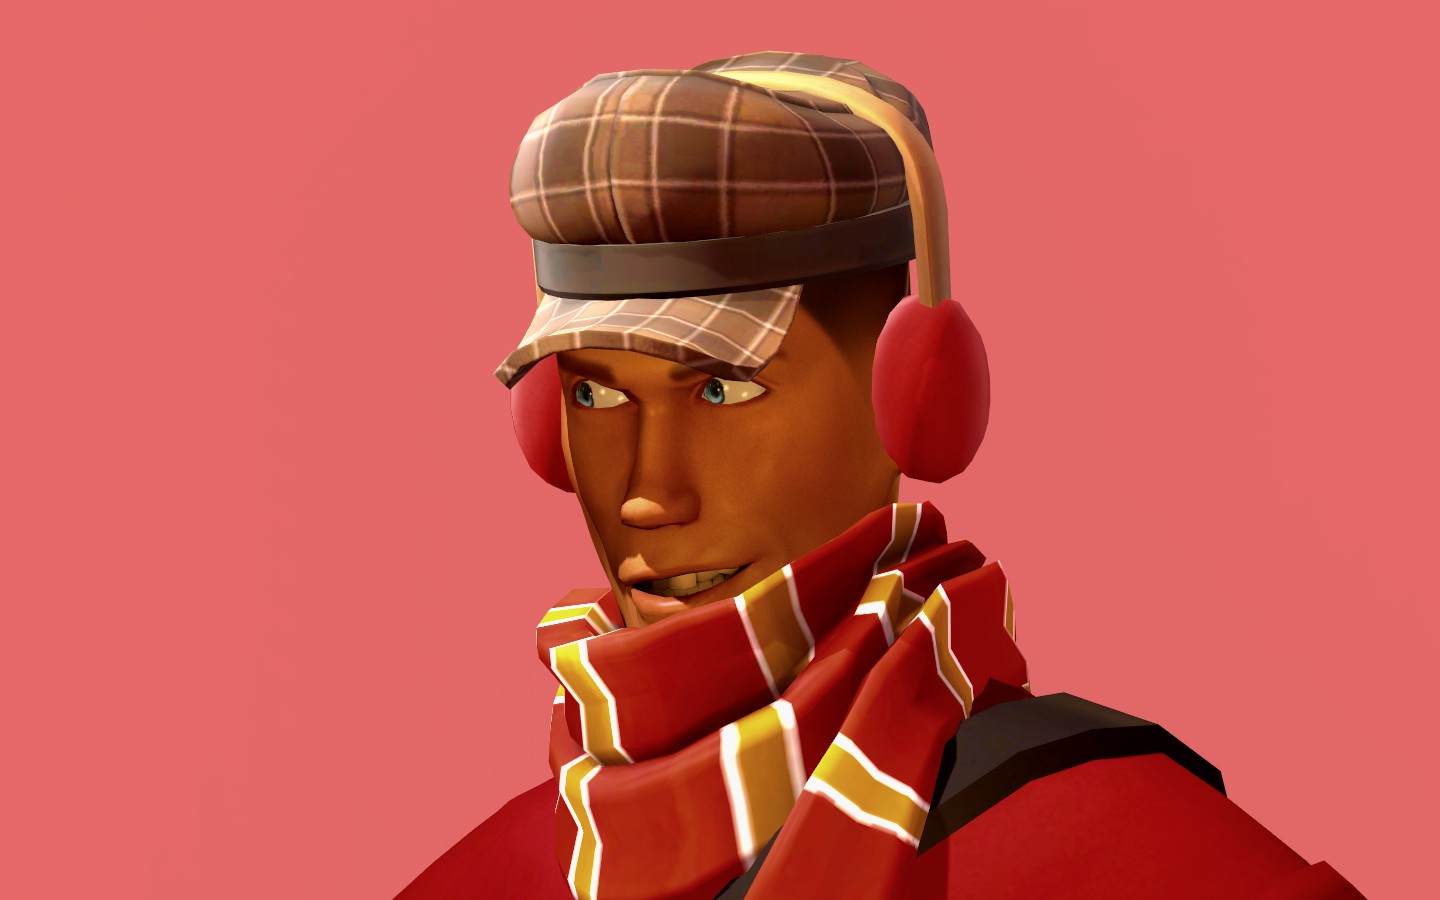 Making simple GMod TF2 posters/avatars - Artist's Lounge   forums